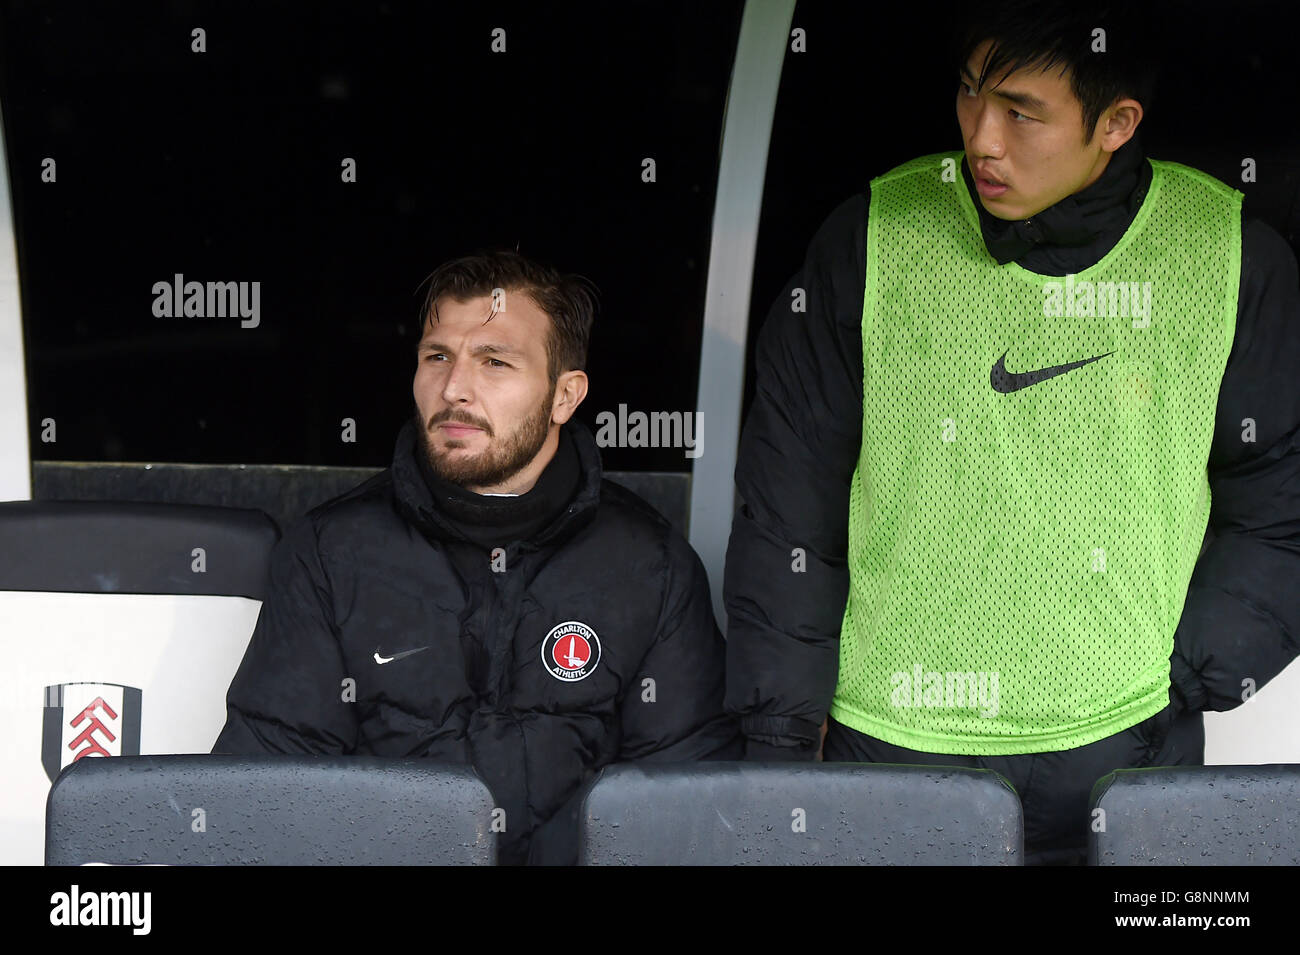 Charlton Athletic's Marco Motta and Yun Suk-Young (right) on the bench before the game Stock Photo